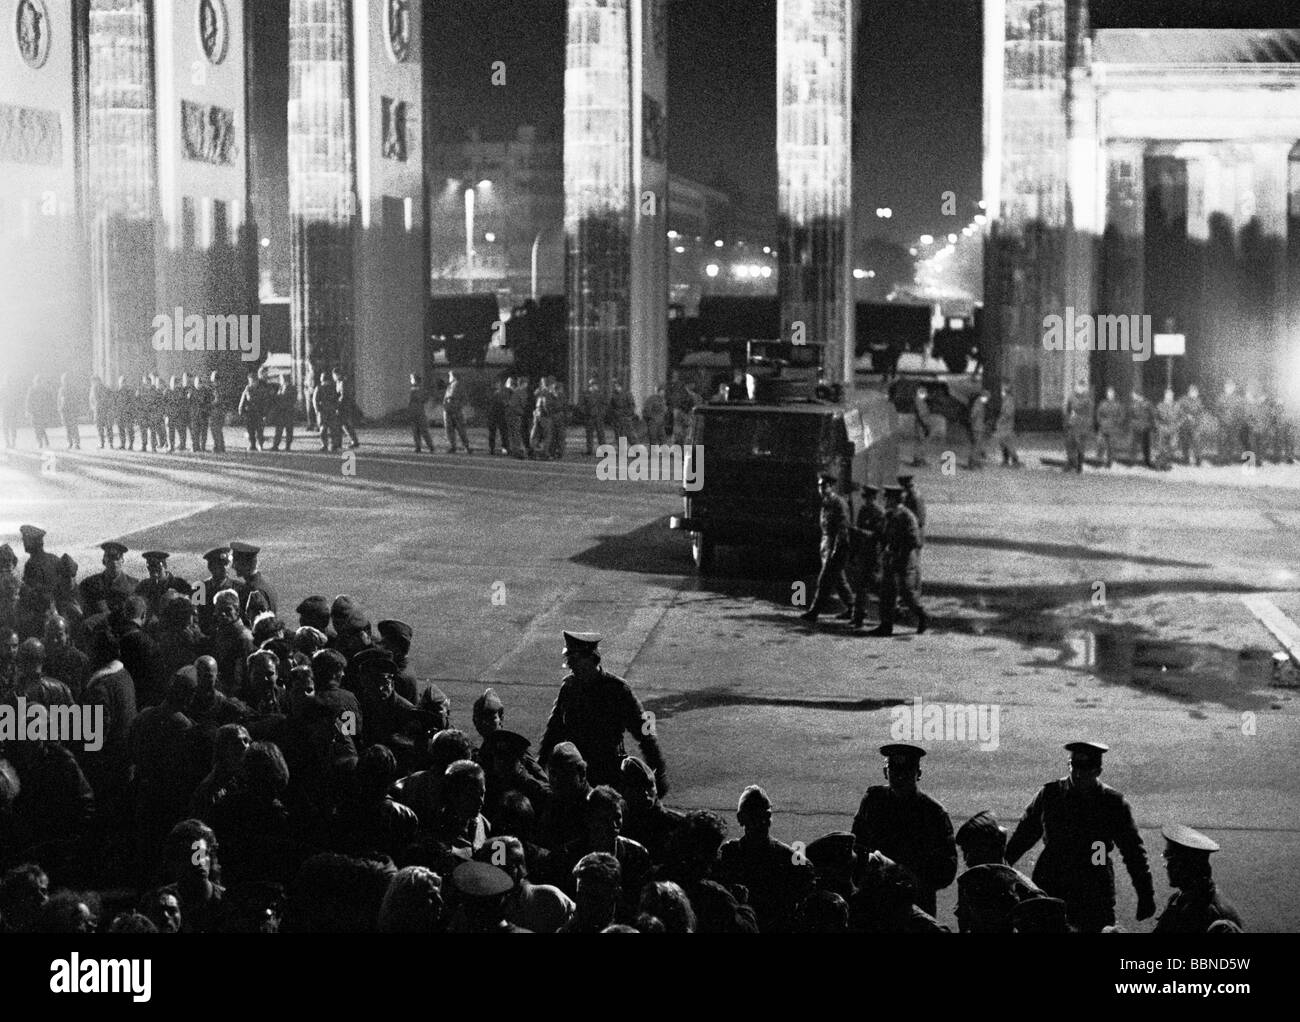 geography / travel, Germany, reunification, Berlin, Berlin Wall, GDR border troops controlling the Brandenburg Gate with watercannon cars, night shot, 10. / 11.11.1989, East Germany, historic, historical, East-Germany, 20th century, 1980s, 80s, Pariser Platz, Brandenburger Tor, square, celebration, people celebrating the fall, down, opening, turn of events, history, freedom, crossing, November'89, November 89, border patrol, Stock Photo